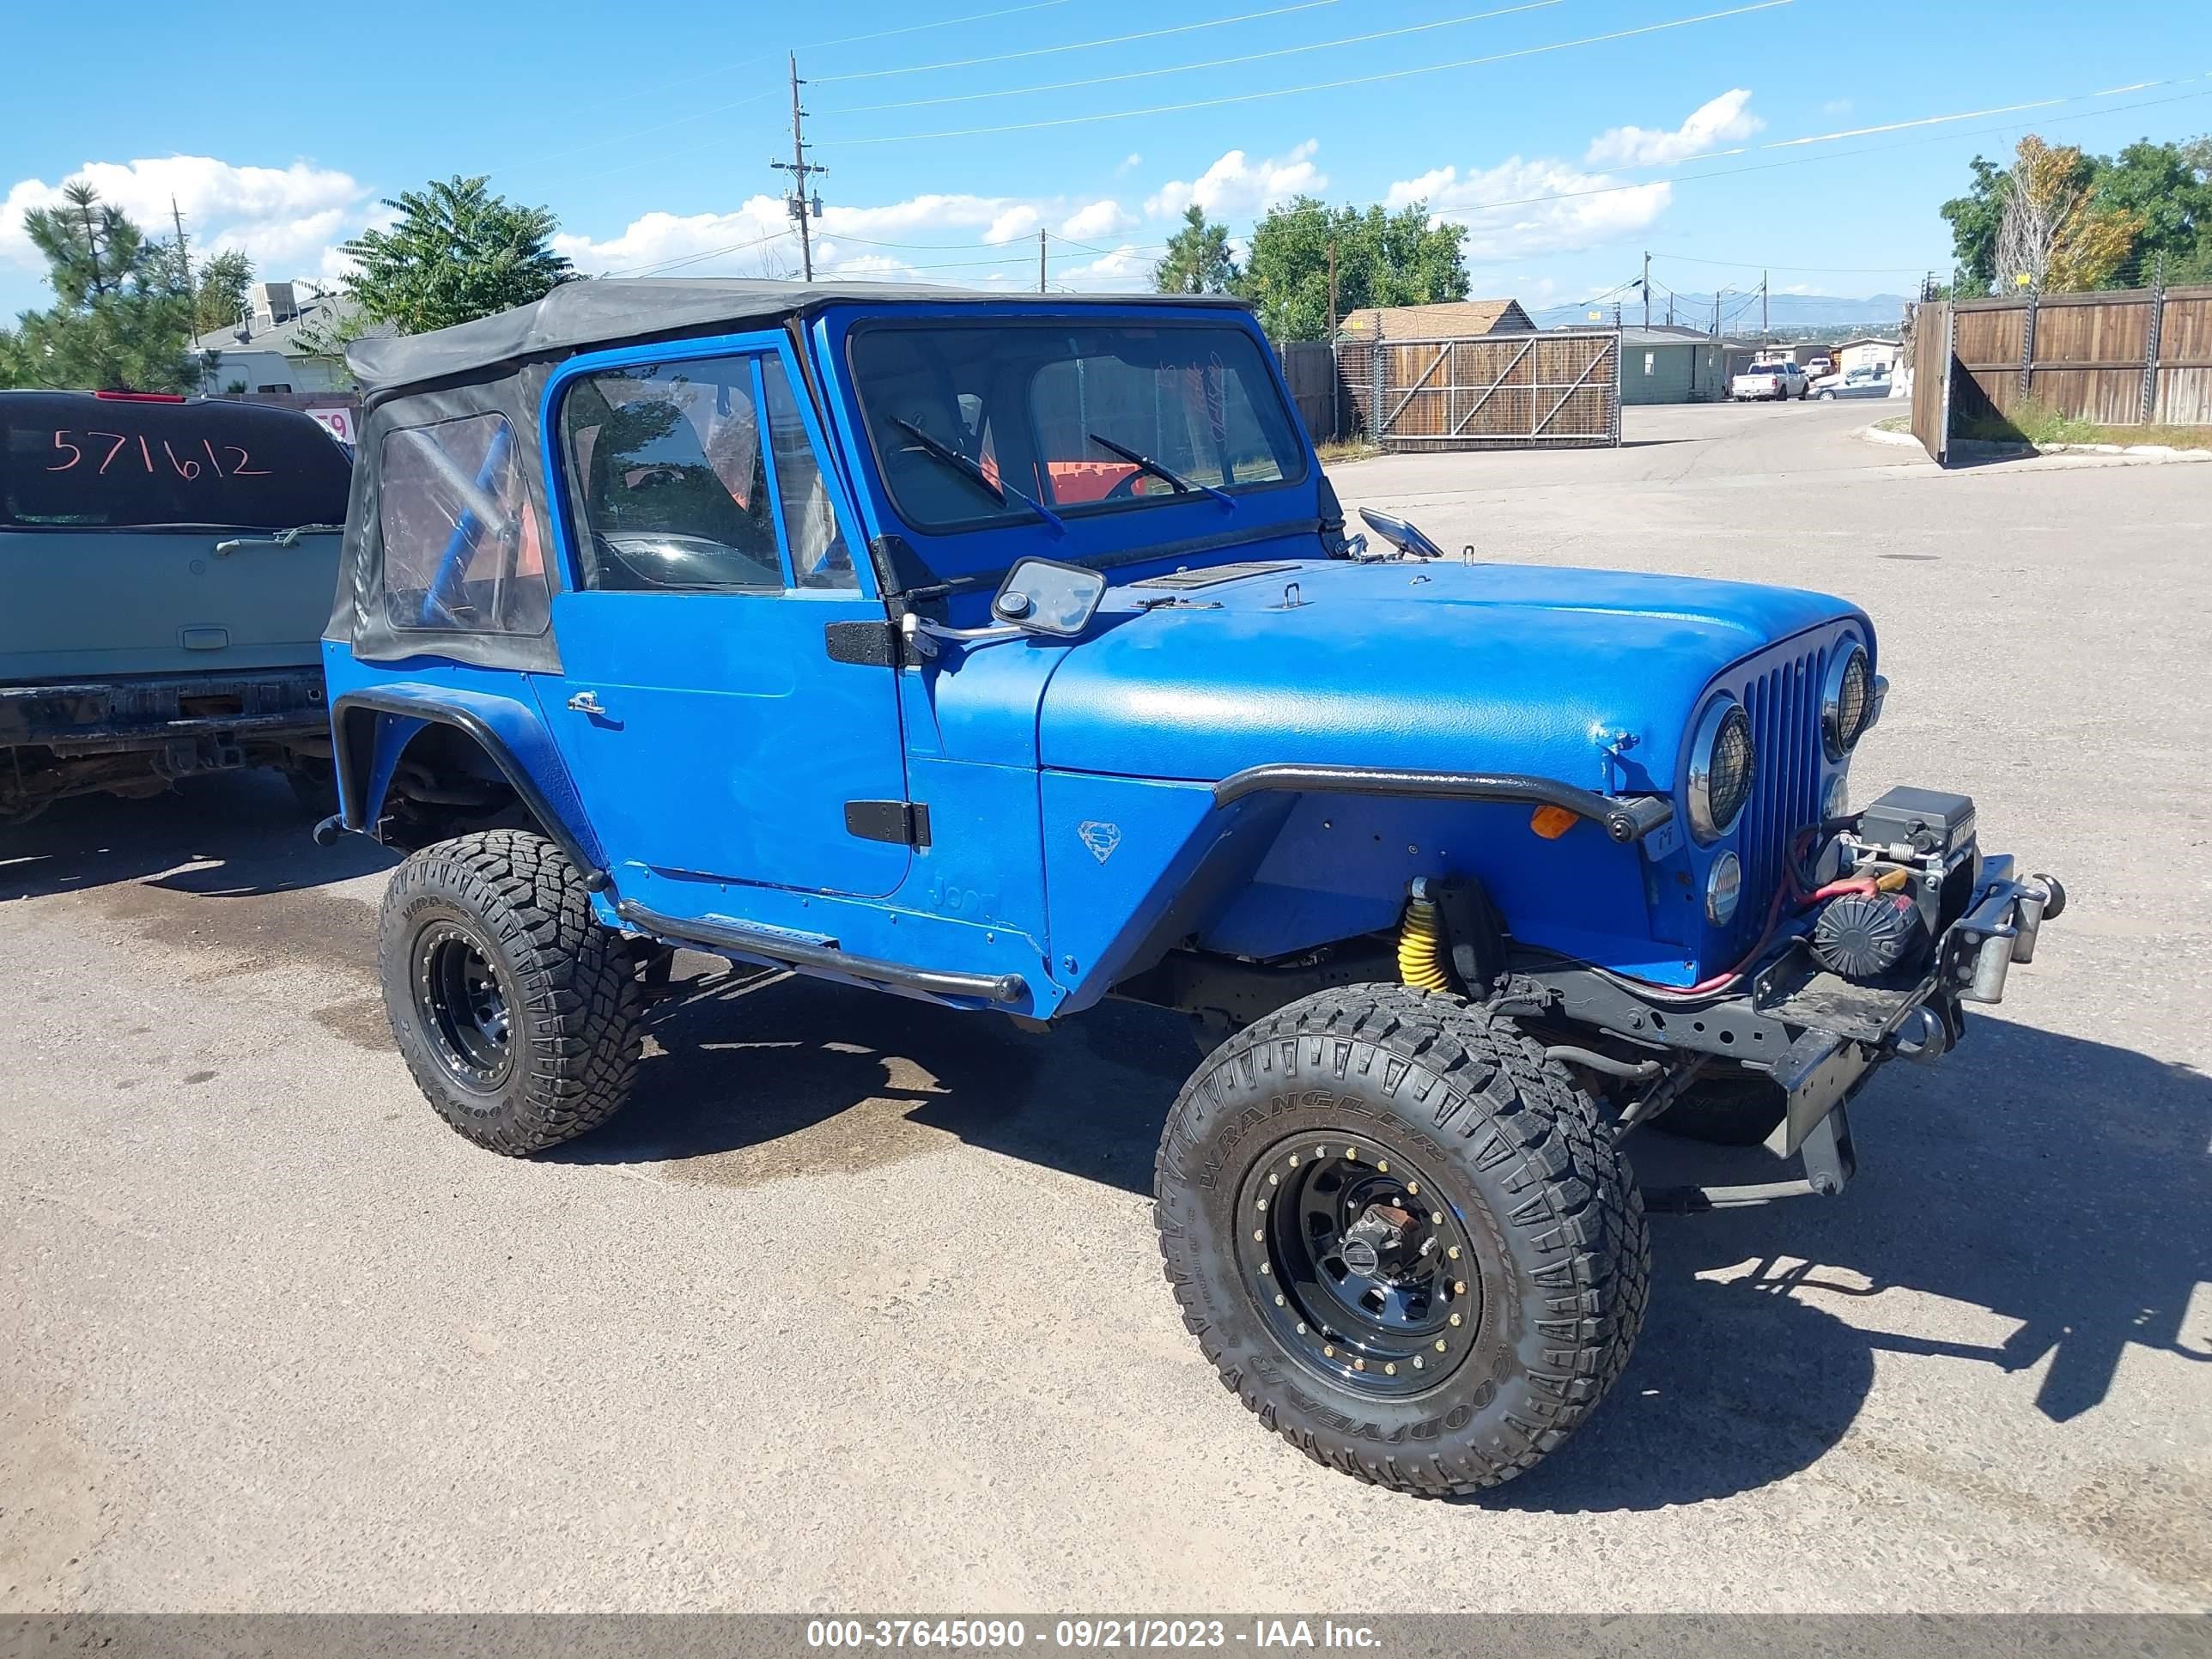 vin: 1JCCM87A7FT074052 1JCCM87A7FT074052 1985 jeep all 4200 for Sale in 80022, 8510 Brighton Rd., Commerce City, Colorado, USA